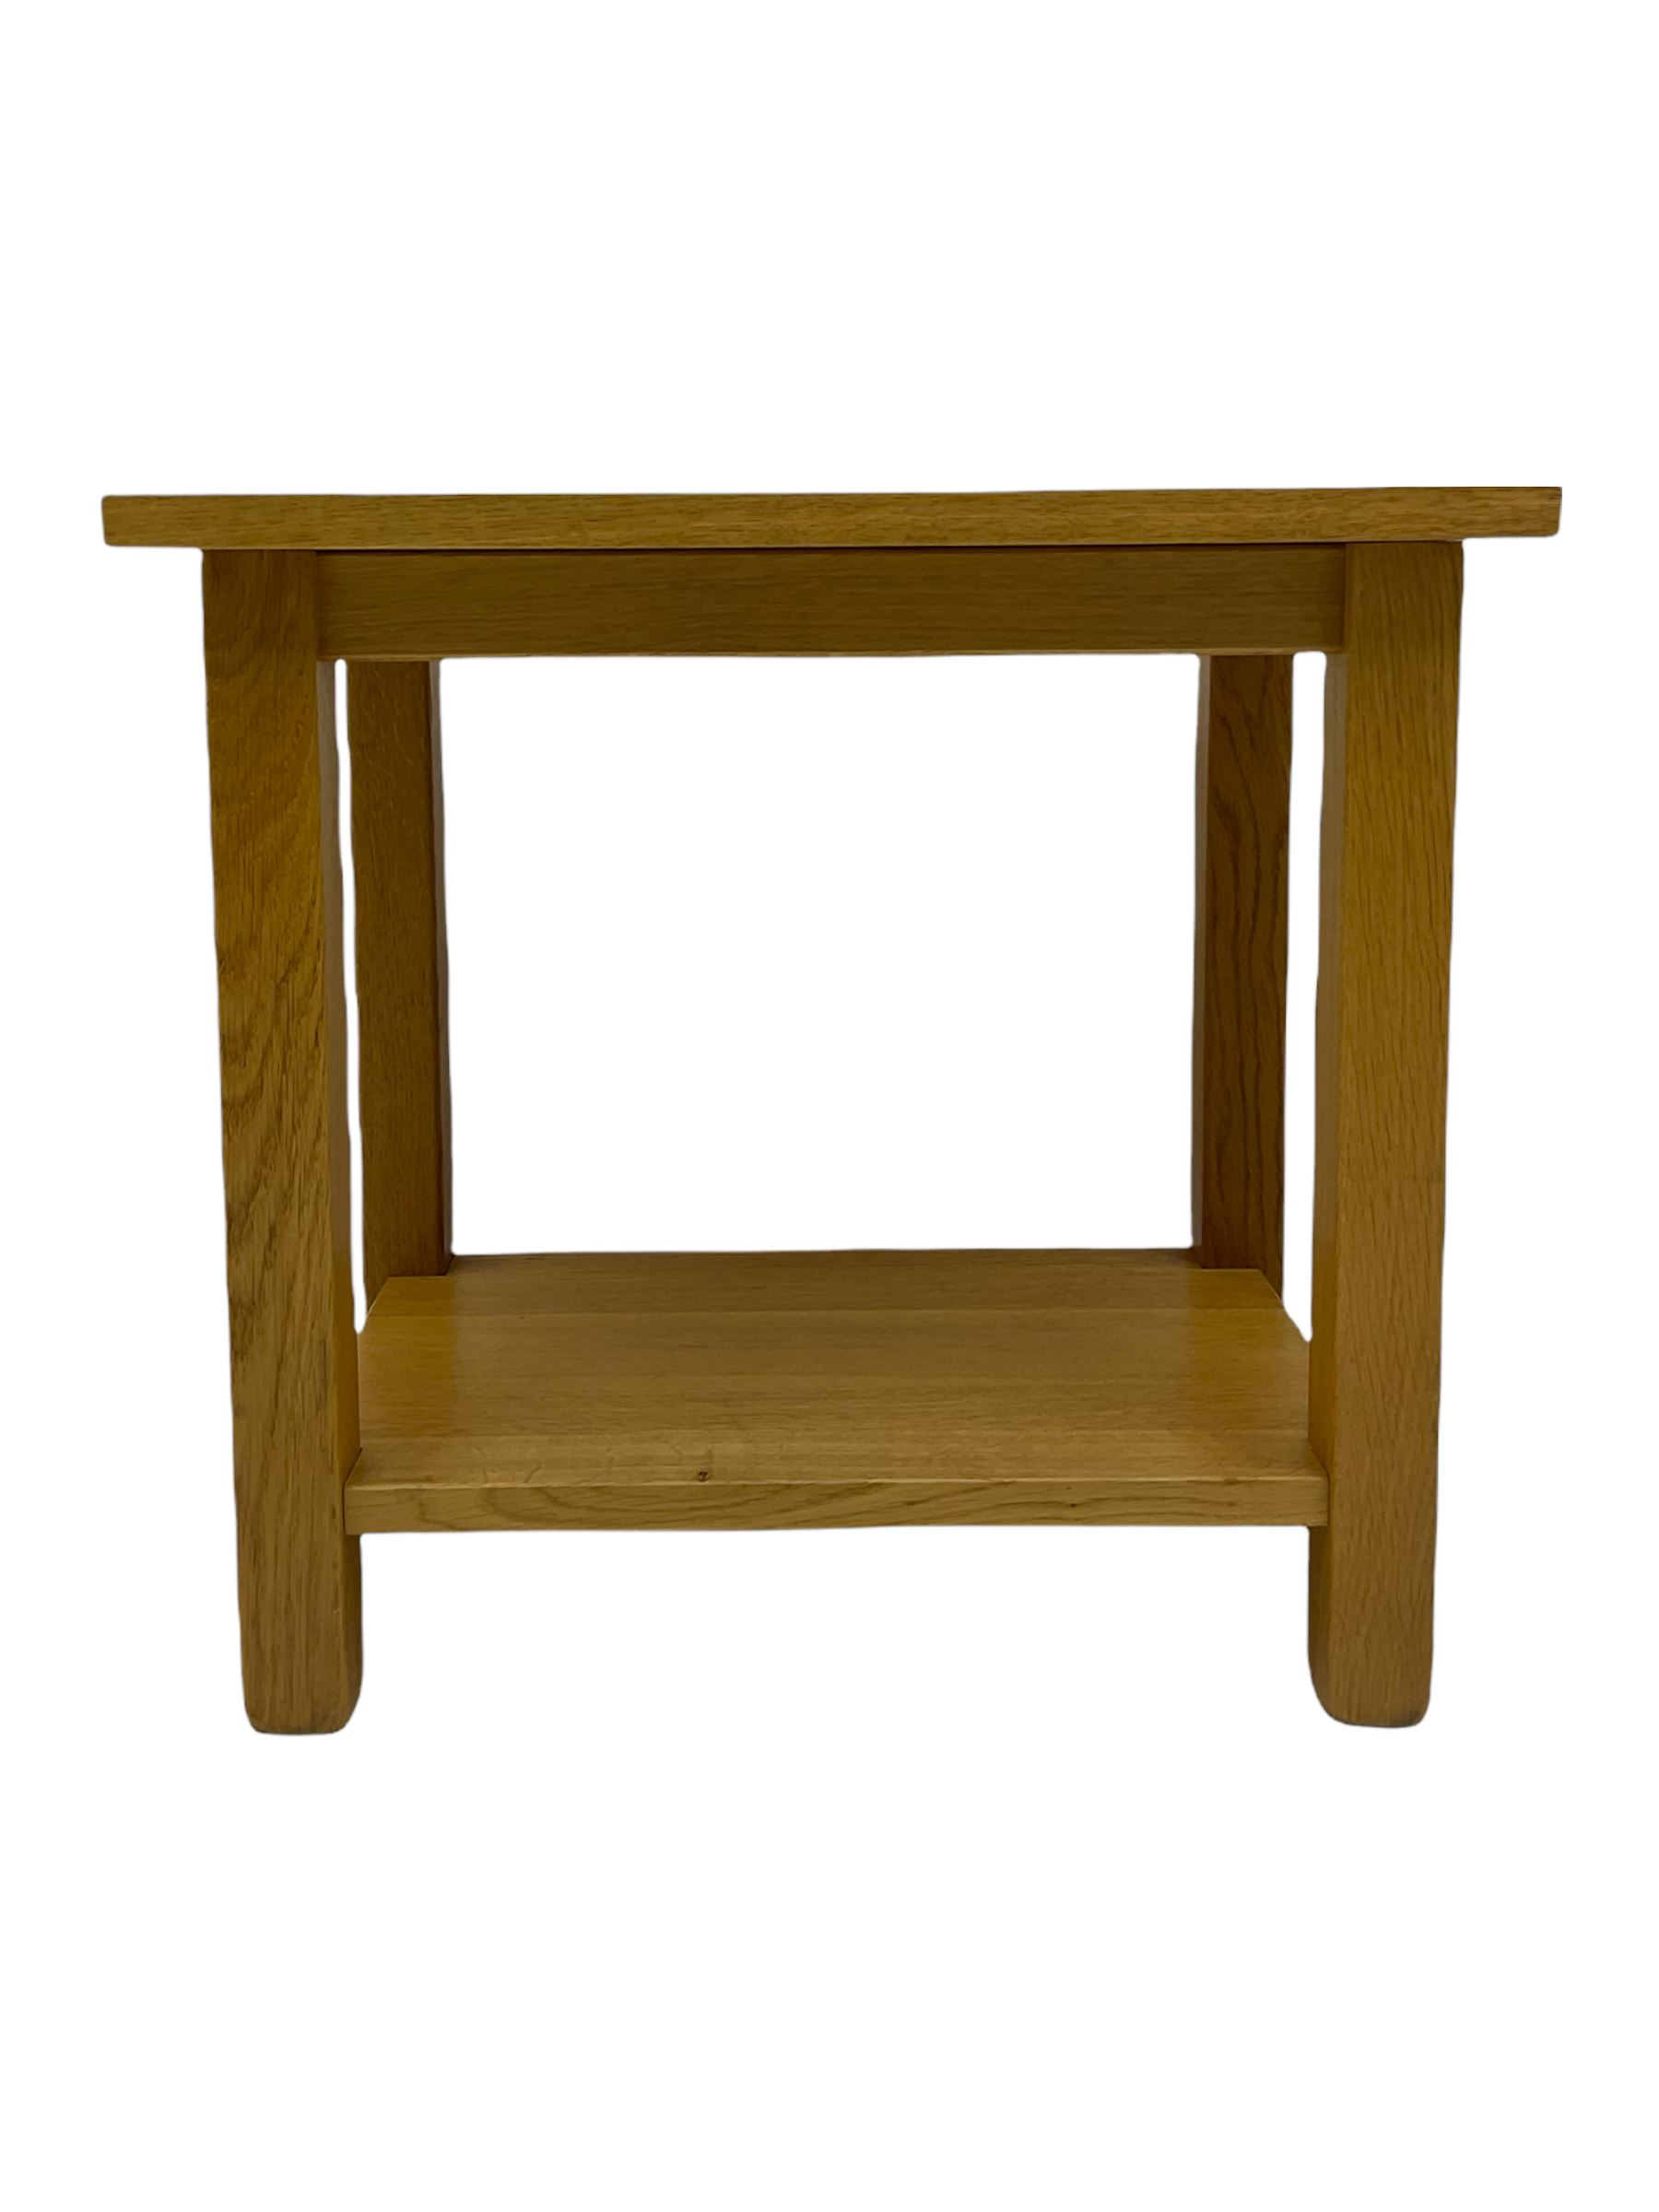 Oak two tier lamp table - Image 2 of 7